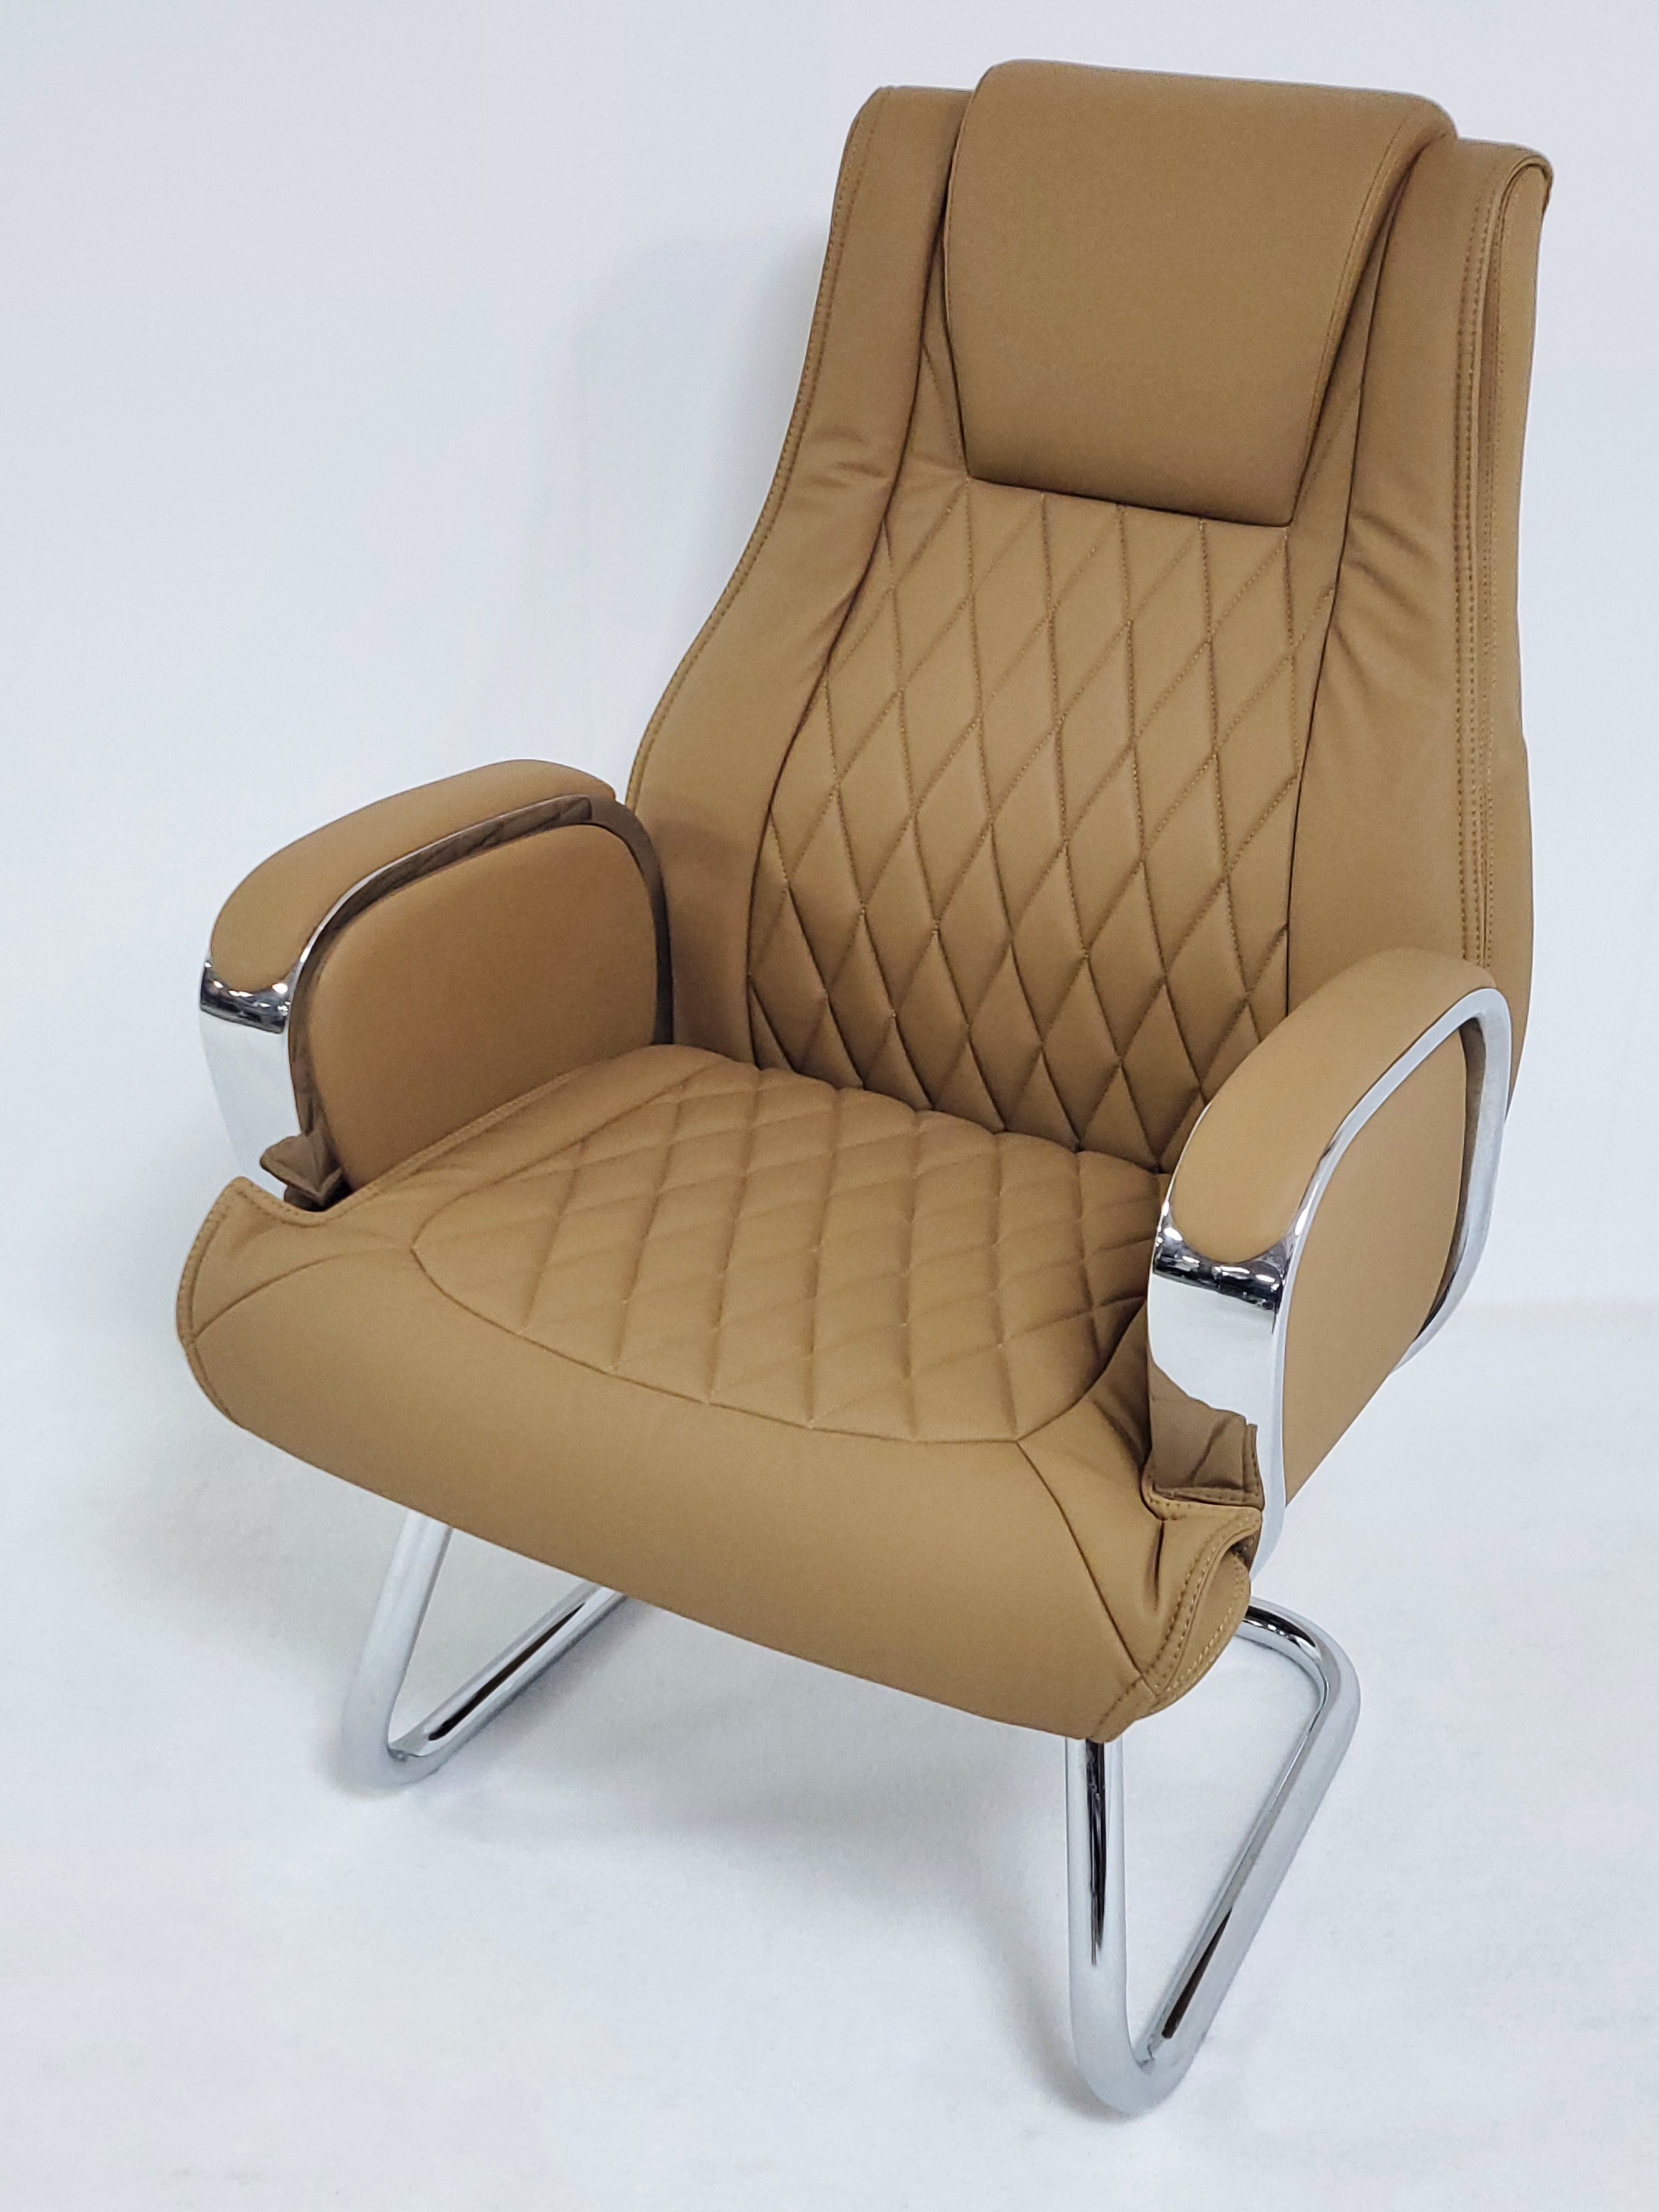 Heavy Duty Modern Beige Leather Visitor Chair with Chrome Arms - CHA-1202C Near Me